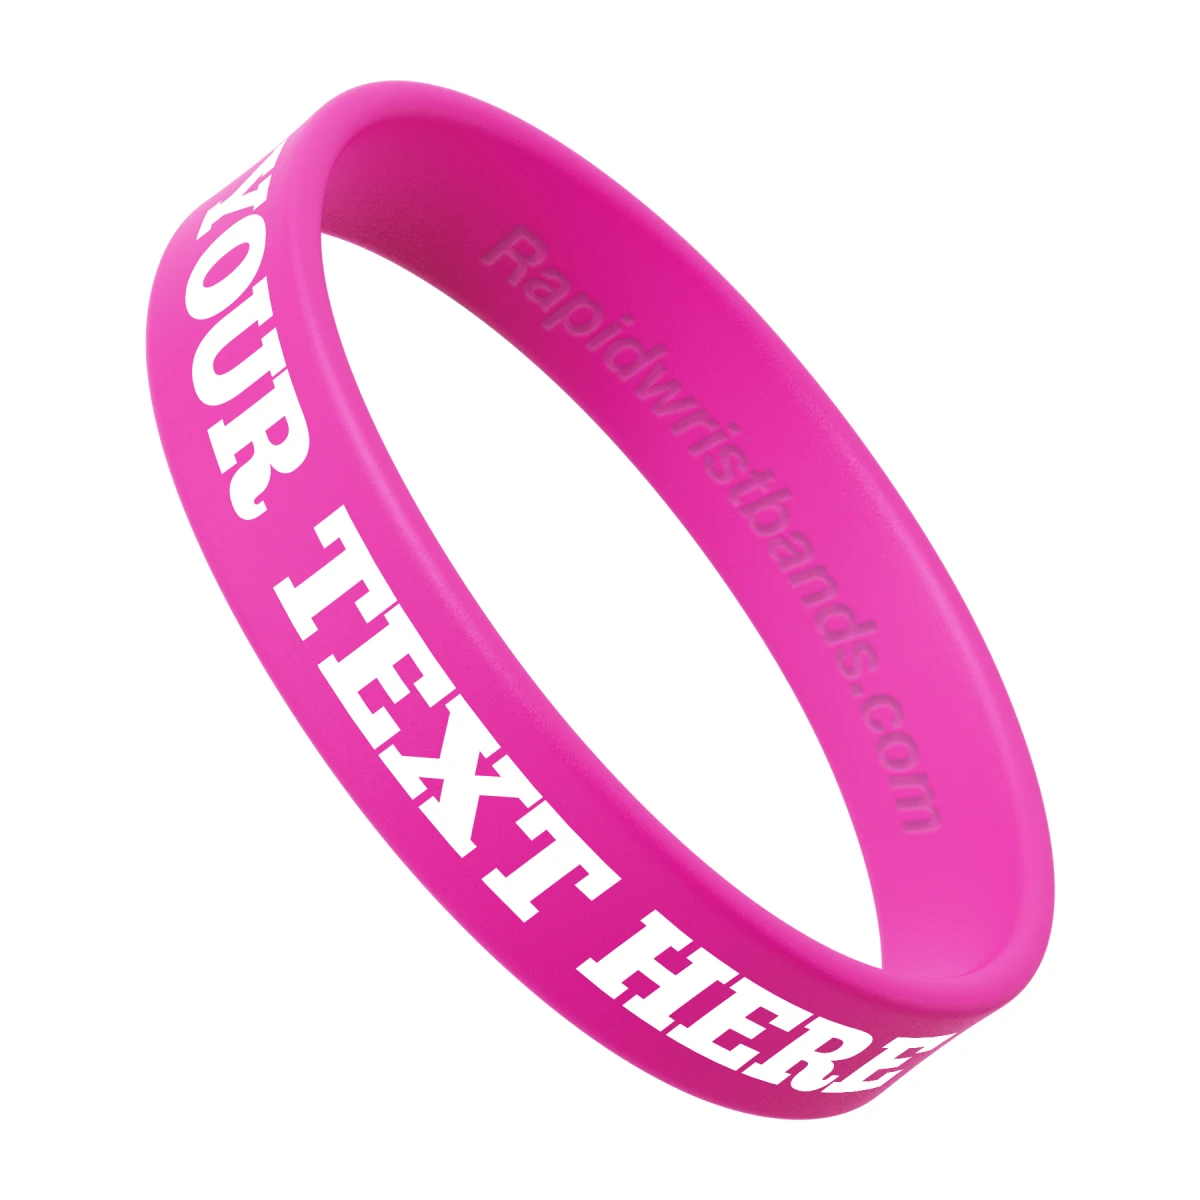 Hot Pink Wristband With Your Text Here Printed In White